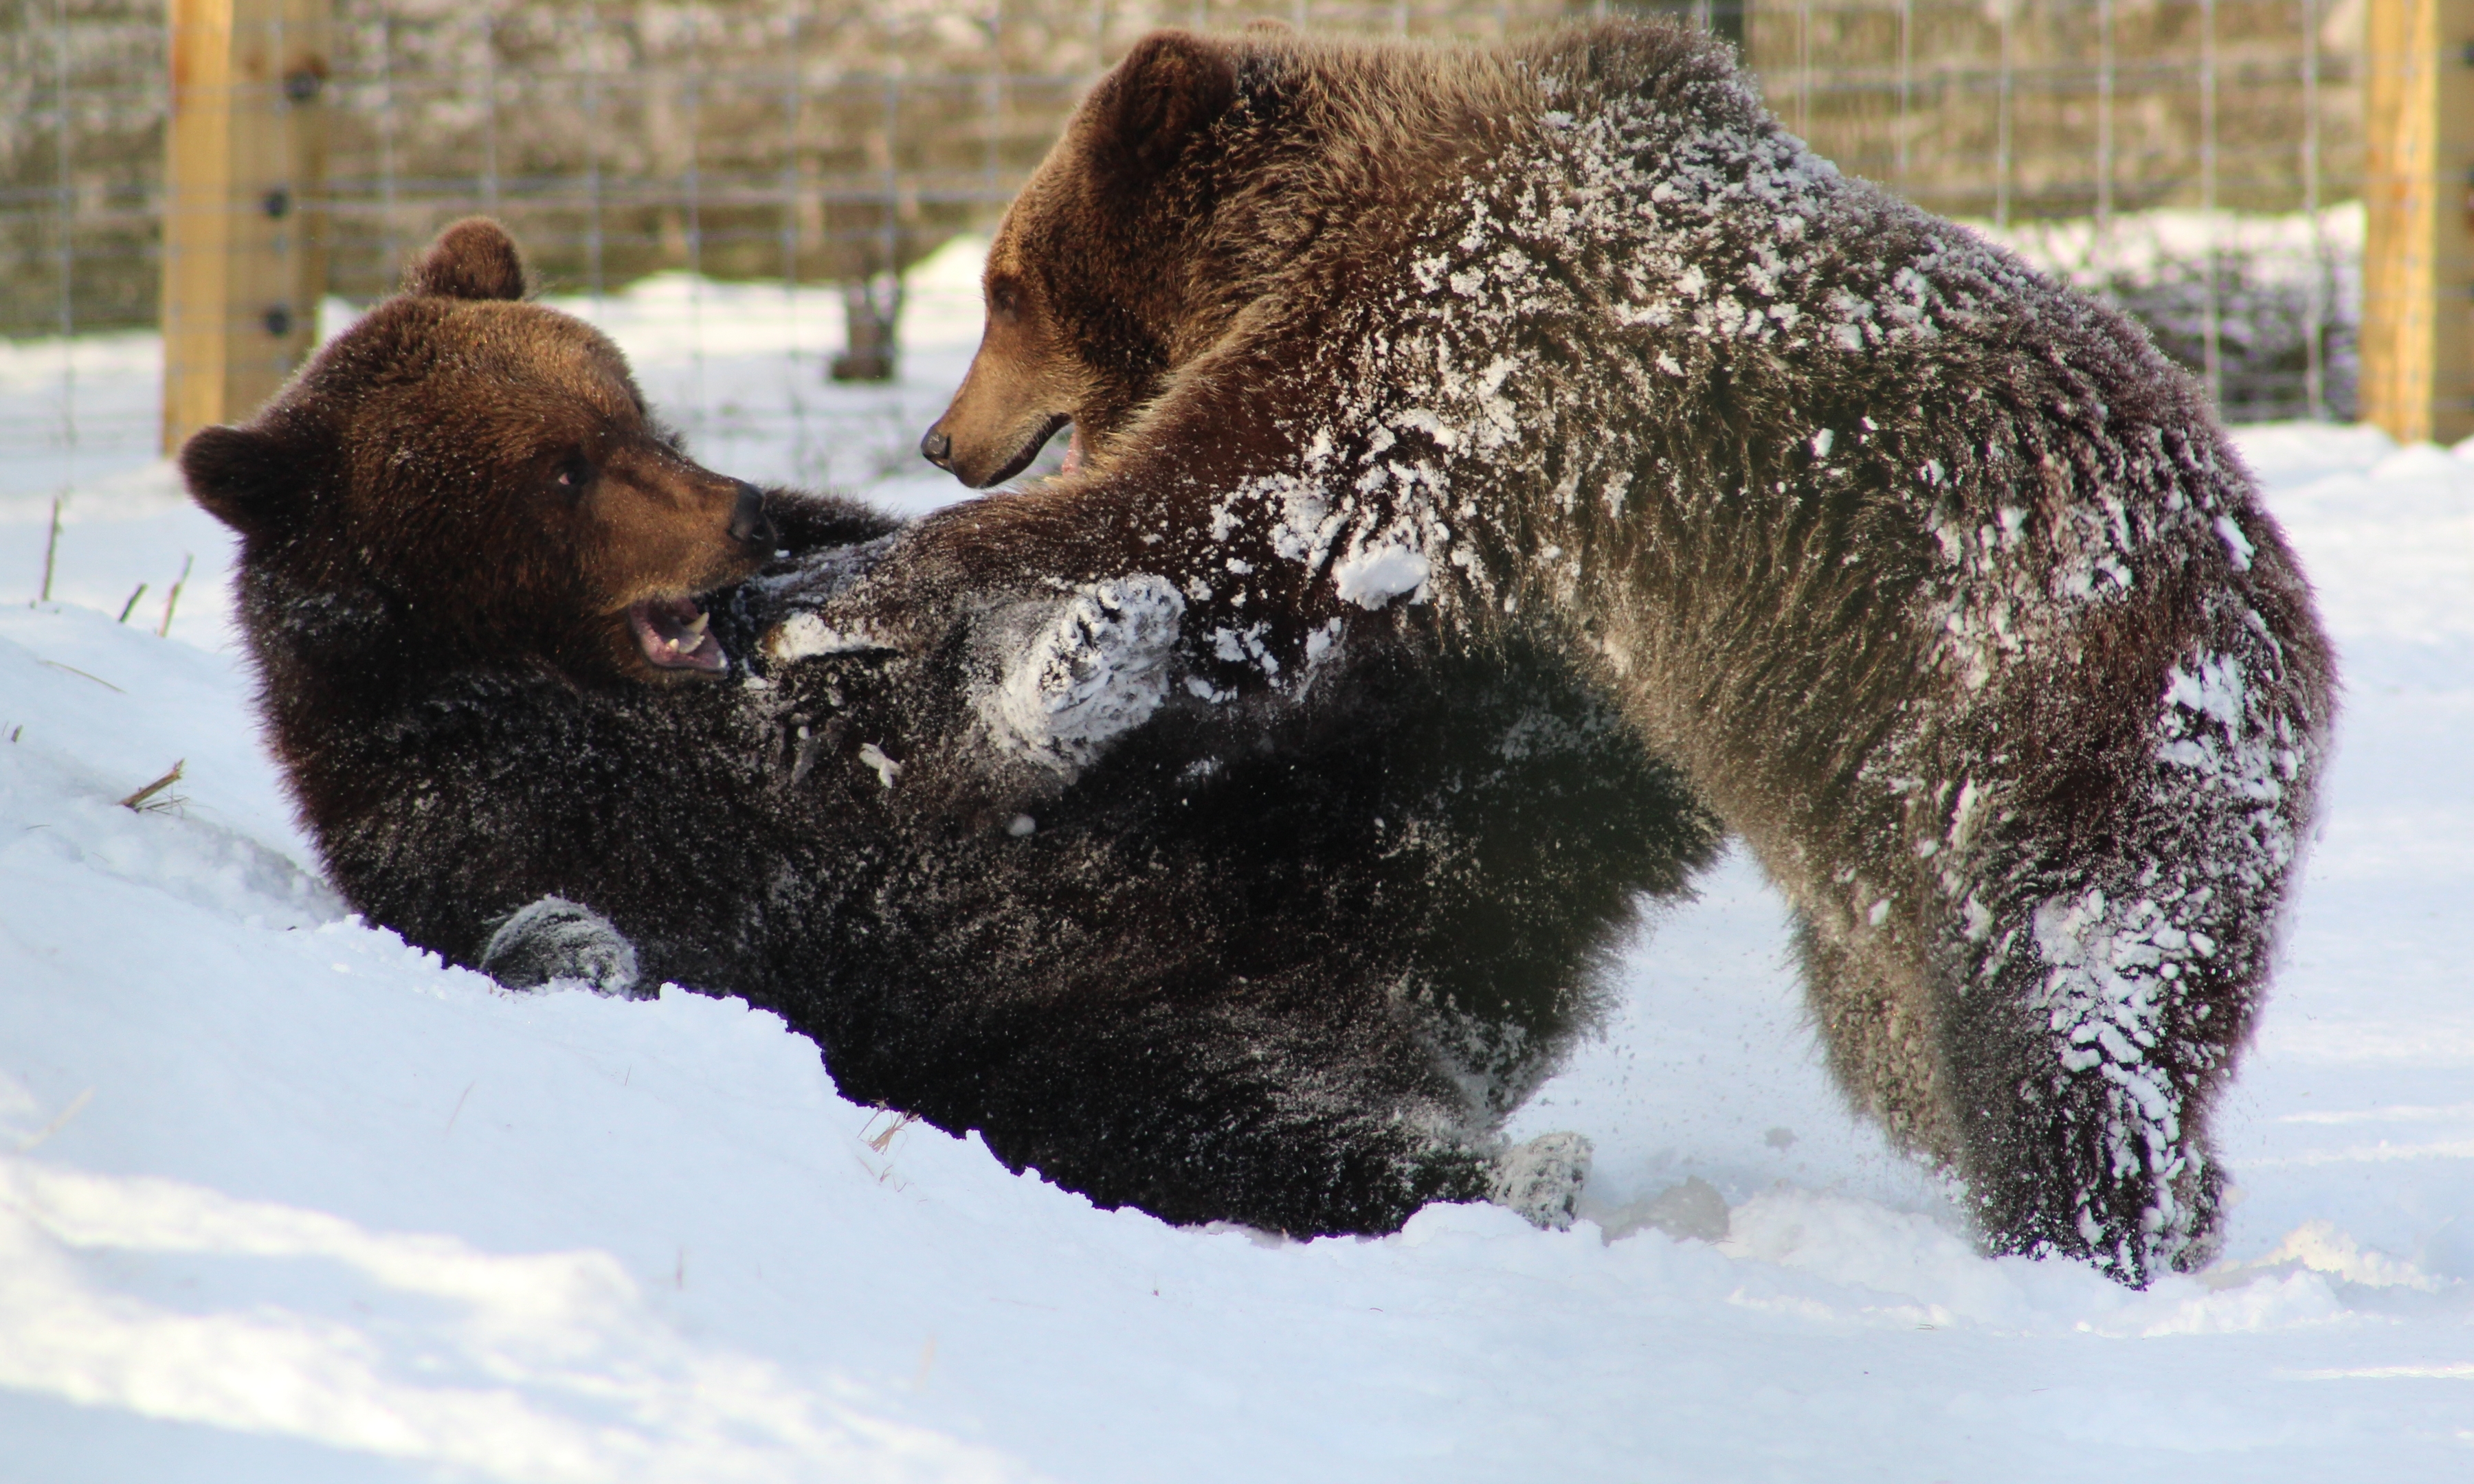 While humans were battling to get to work, Camperdown Wildlife Park's new bears were delighted to play in the snow.